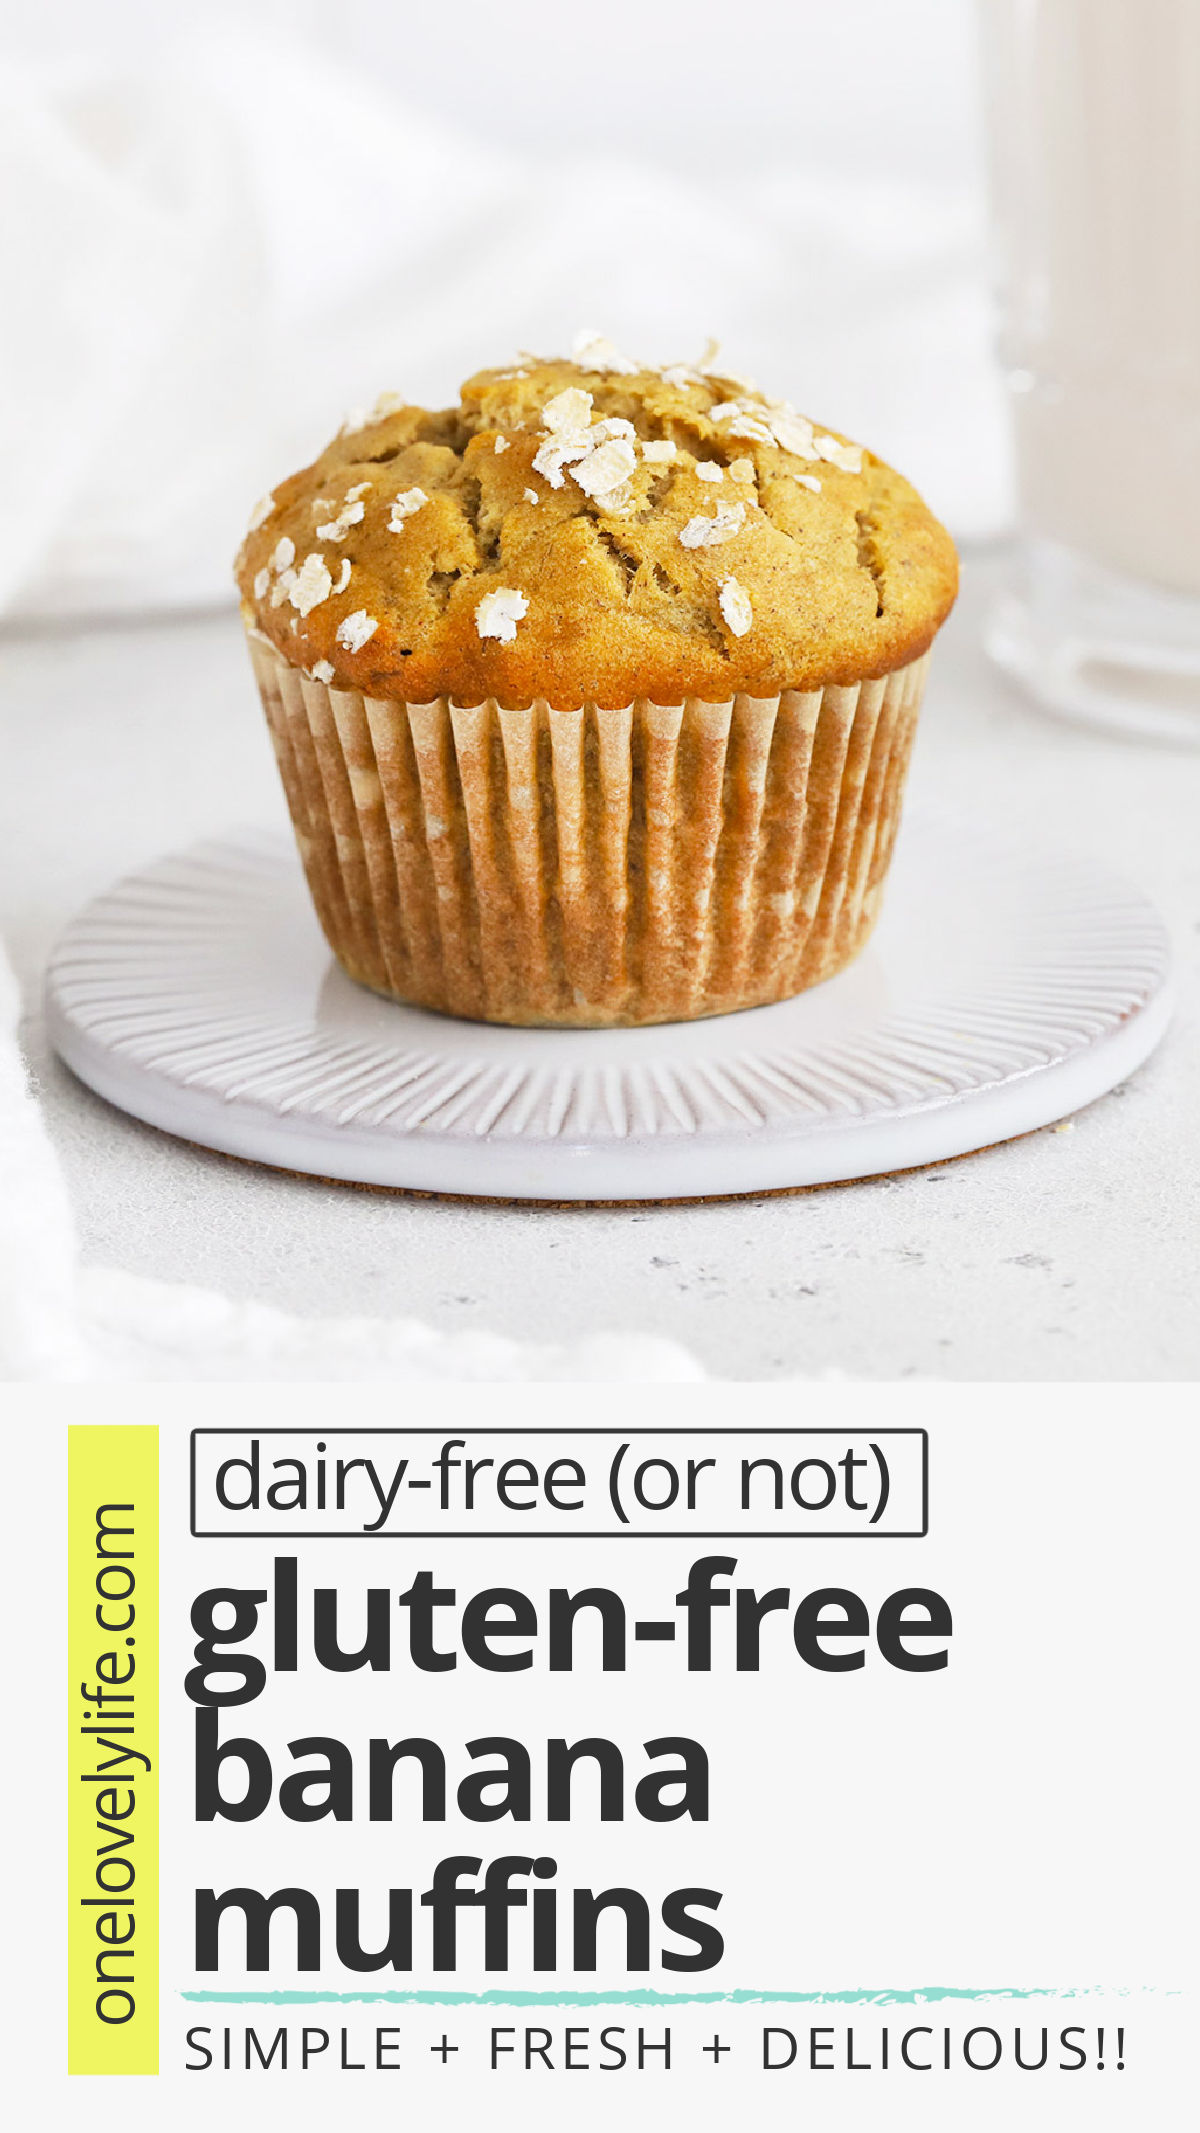 Gluten-Free Banana Muffins - This popular banana muffin recipe is the BEST! With the golden tops and fluffy middles, you'd never know they're gluten-free and dairy-free! // Best Gluten Free Banana Muffins Recipe // Healthy Banana Muffins Recipe // Healthy Gluten Free Banana Muffins // Gluten Free Banana Oatmeal Muffins #muffins #banana #glutenfree #healthysnack #packedlunch